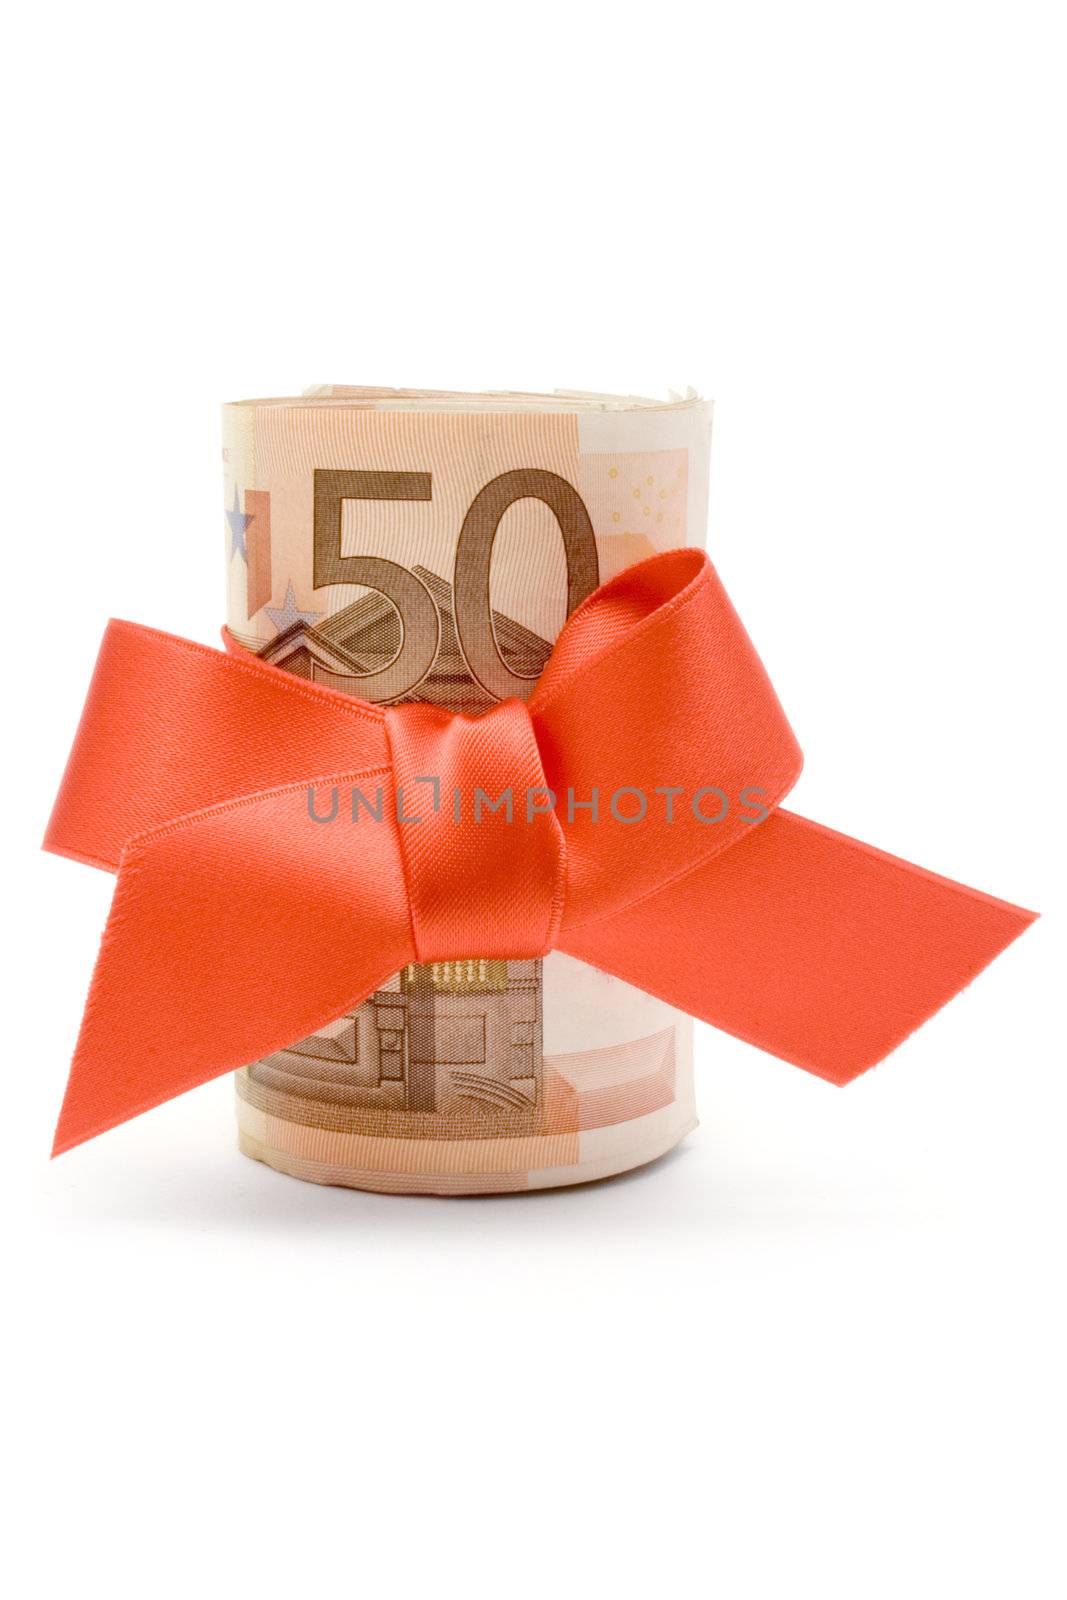 Bundle of 50 Euro banknotes with a red ribbon isolated on a white background.